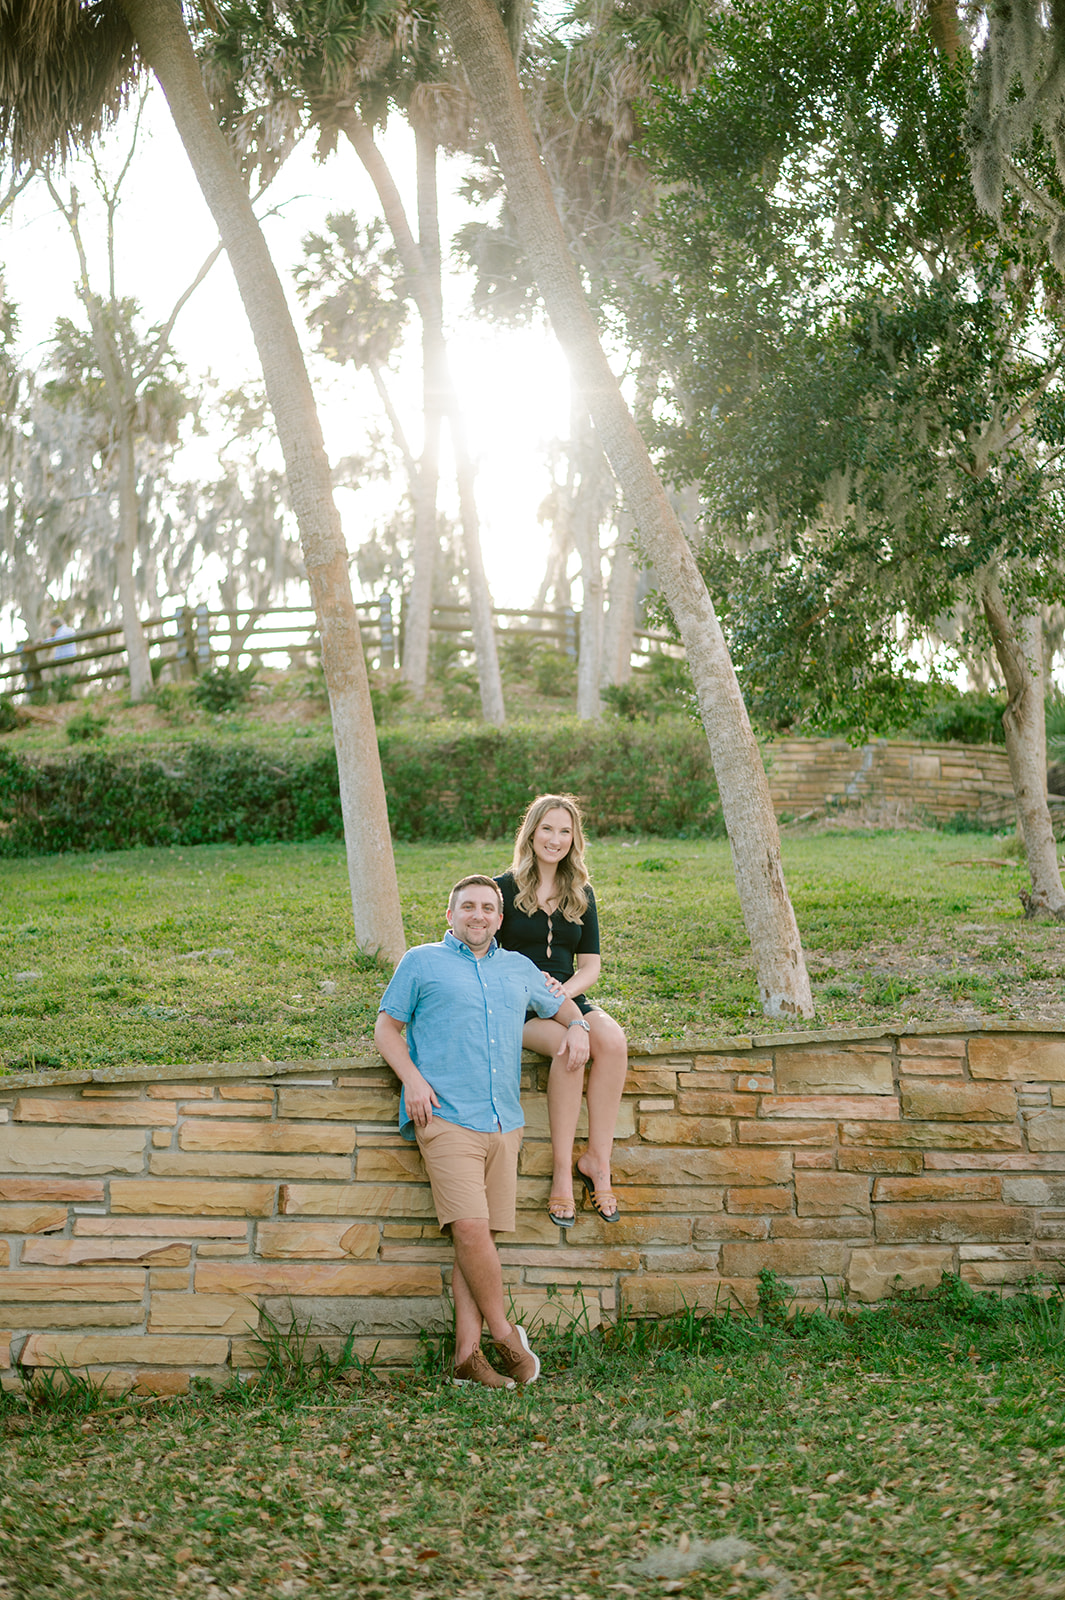 "Engagement session with the natural beauty of Philippe Park in Tampa"
